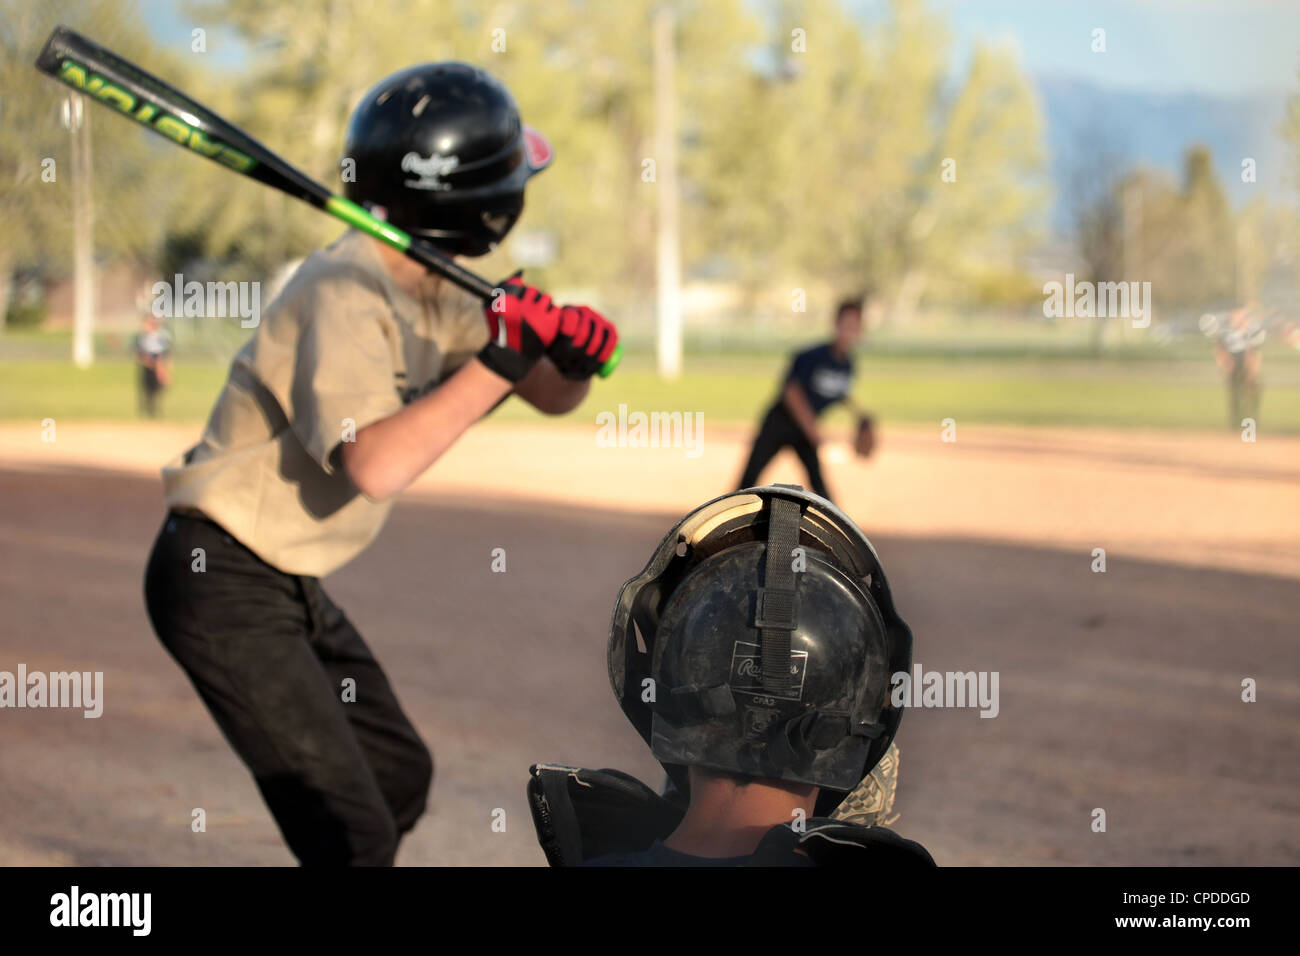 Little league baseball team players boy hits ball and runs to first base. Two teams in uniform. Small farming rural community. Stock Photo